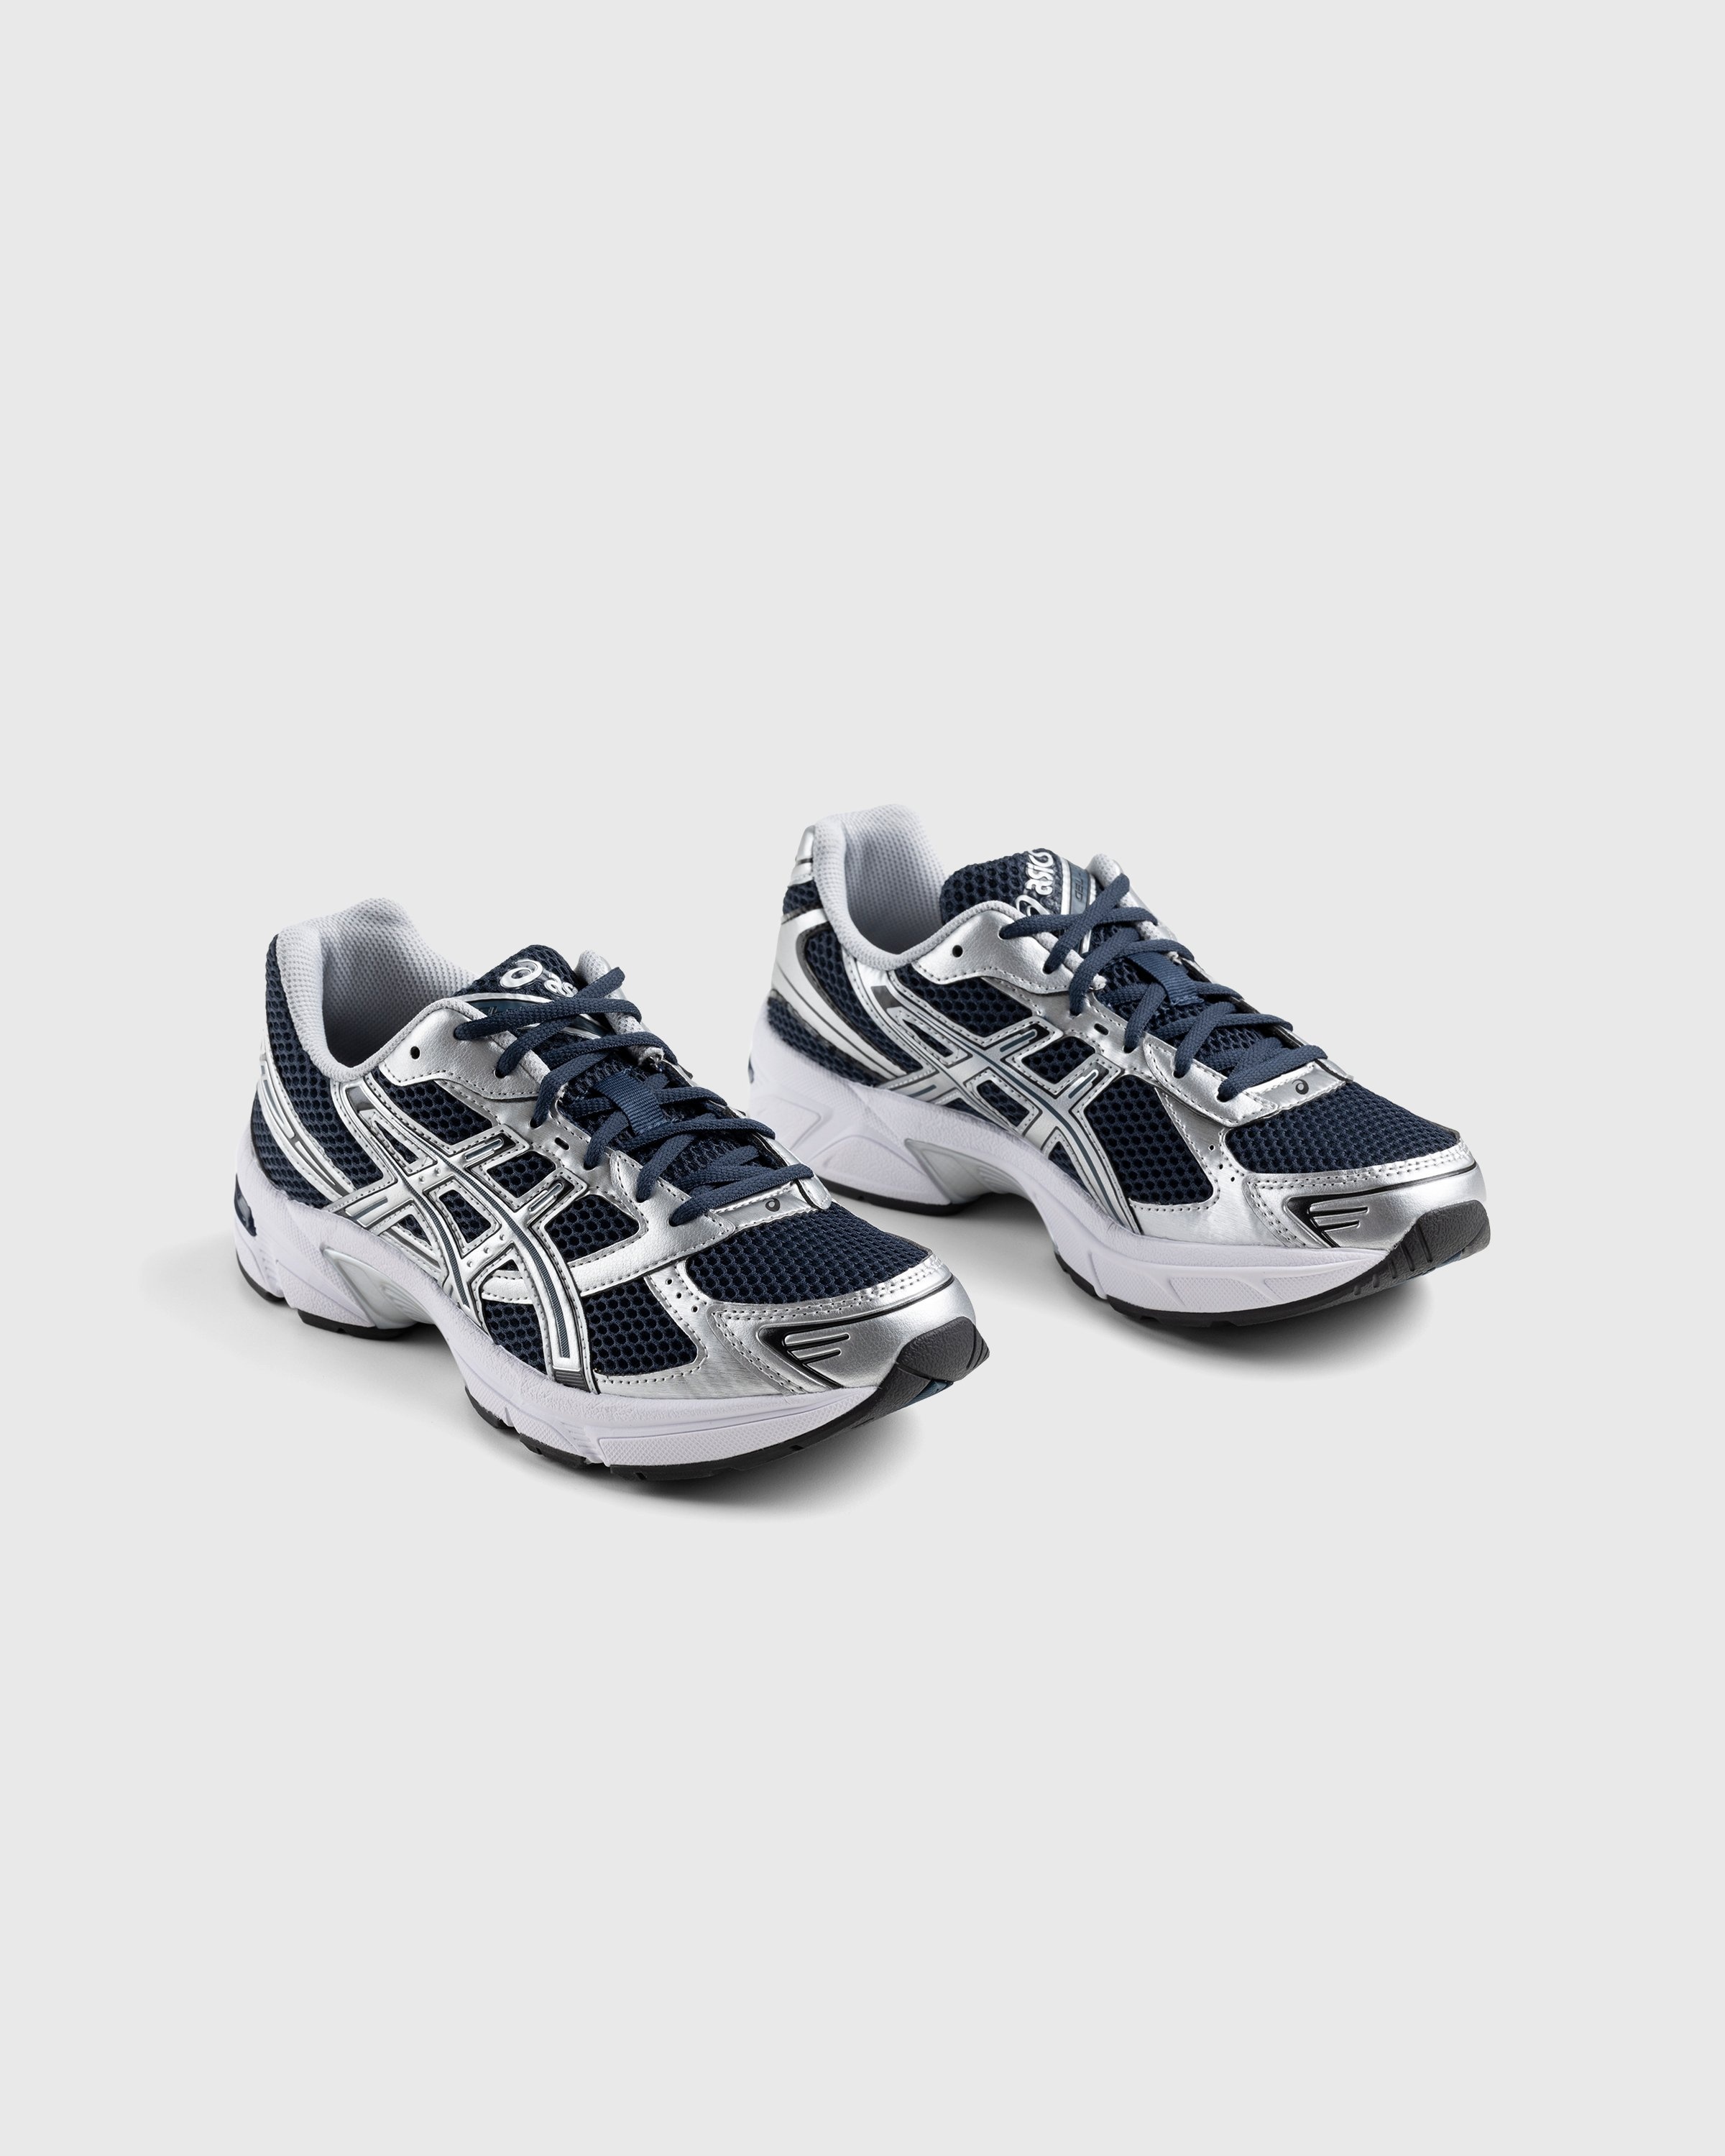 asics – GEL-1130 French Blue/Pure Silver - Low Top Sneakers - Blue - Image 3